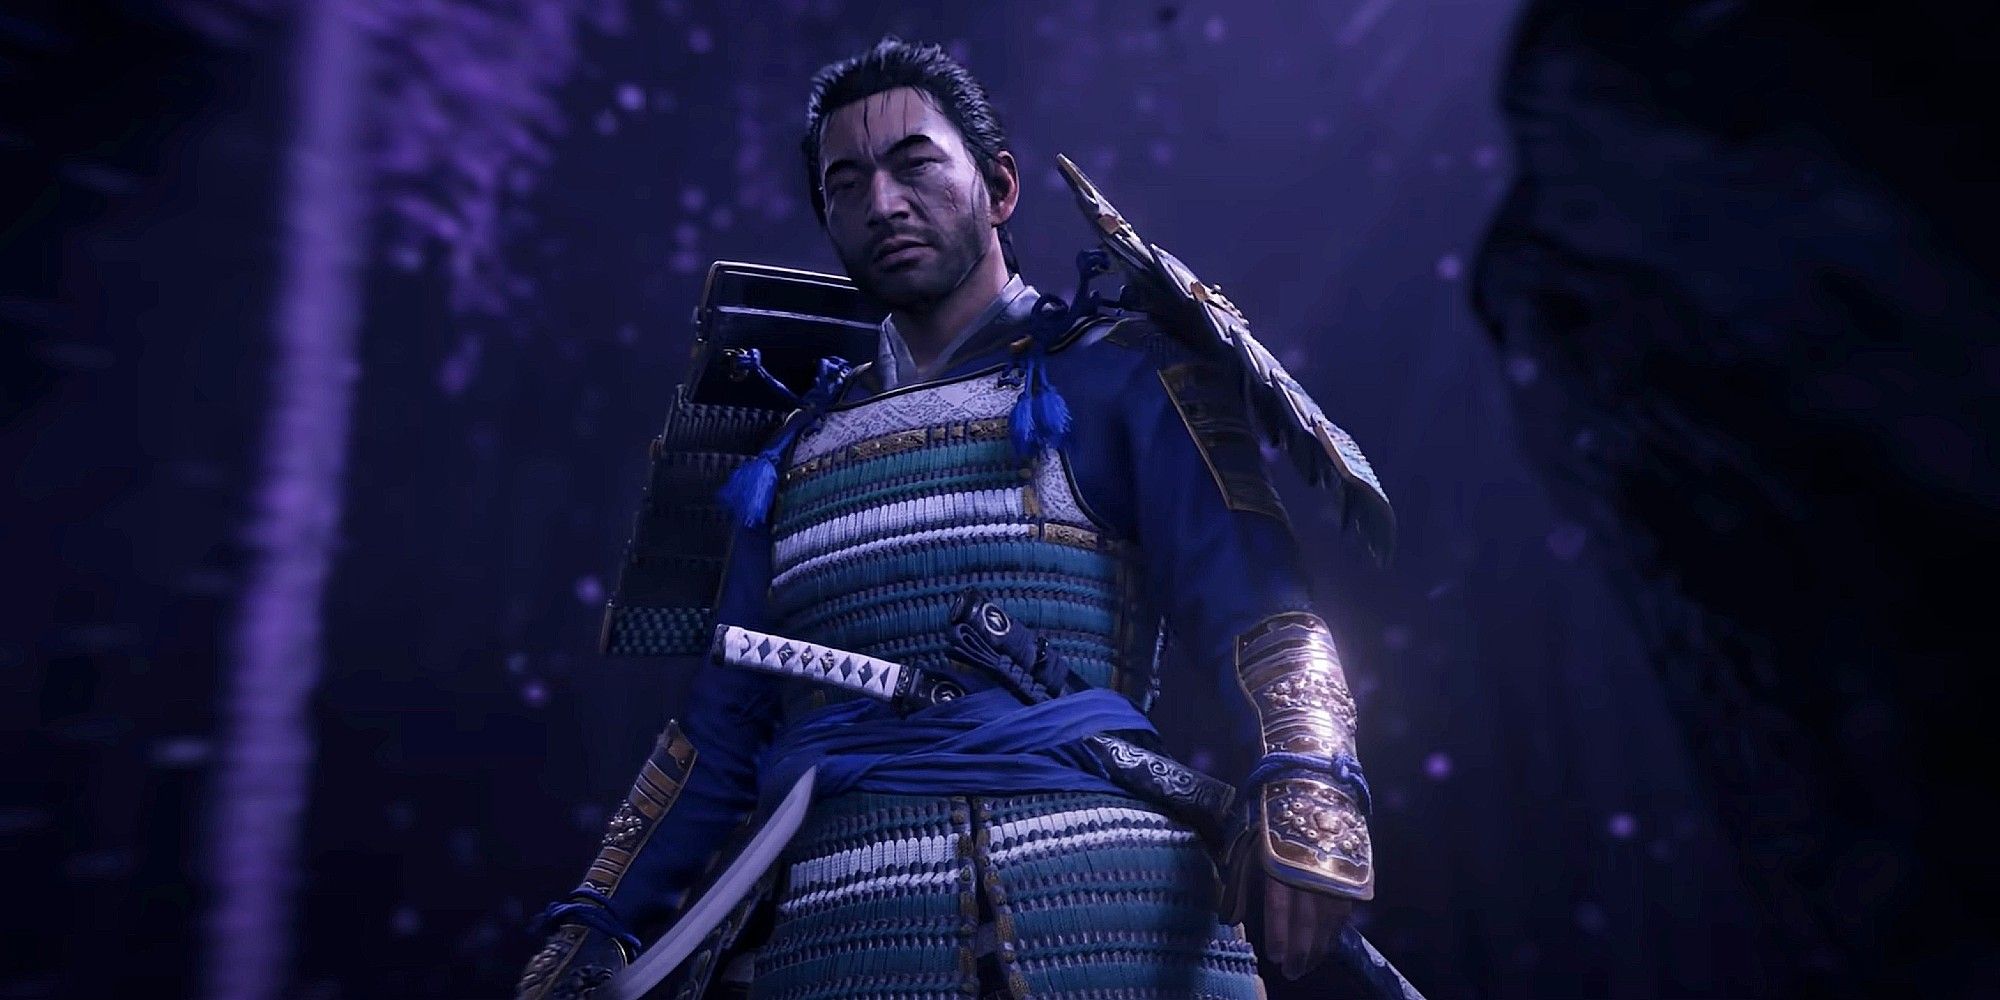 Ghost of Tsushima Critic Reviews - OpenCritic